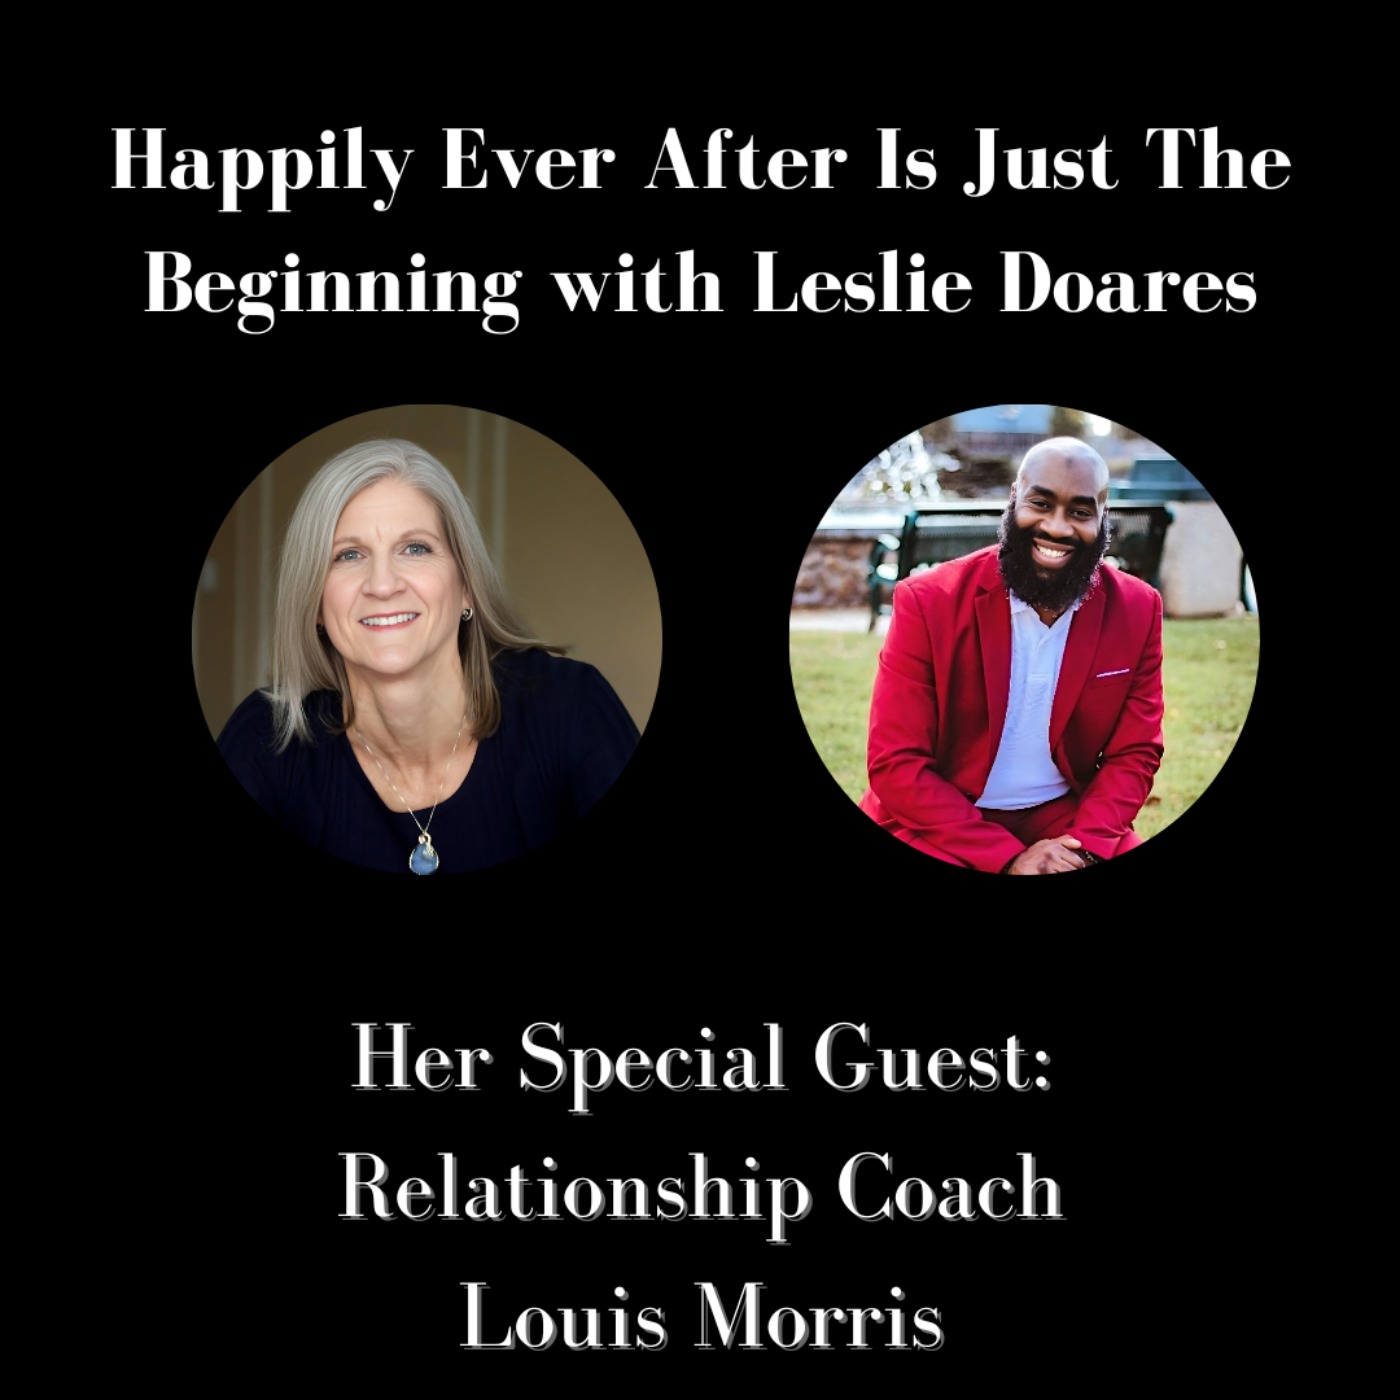 Louis’ Second Appearance on Happily Ever After Is Just The Beginning with Host Lesli Doares